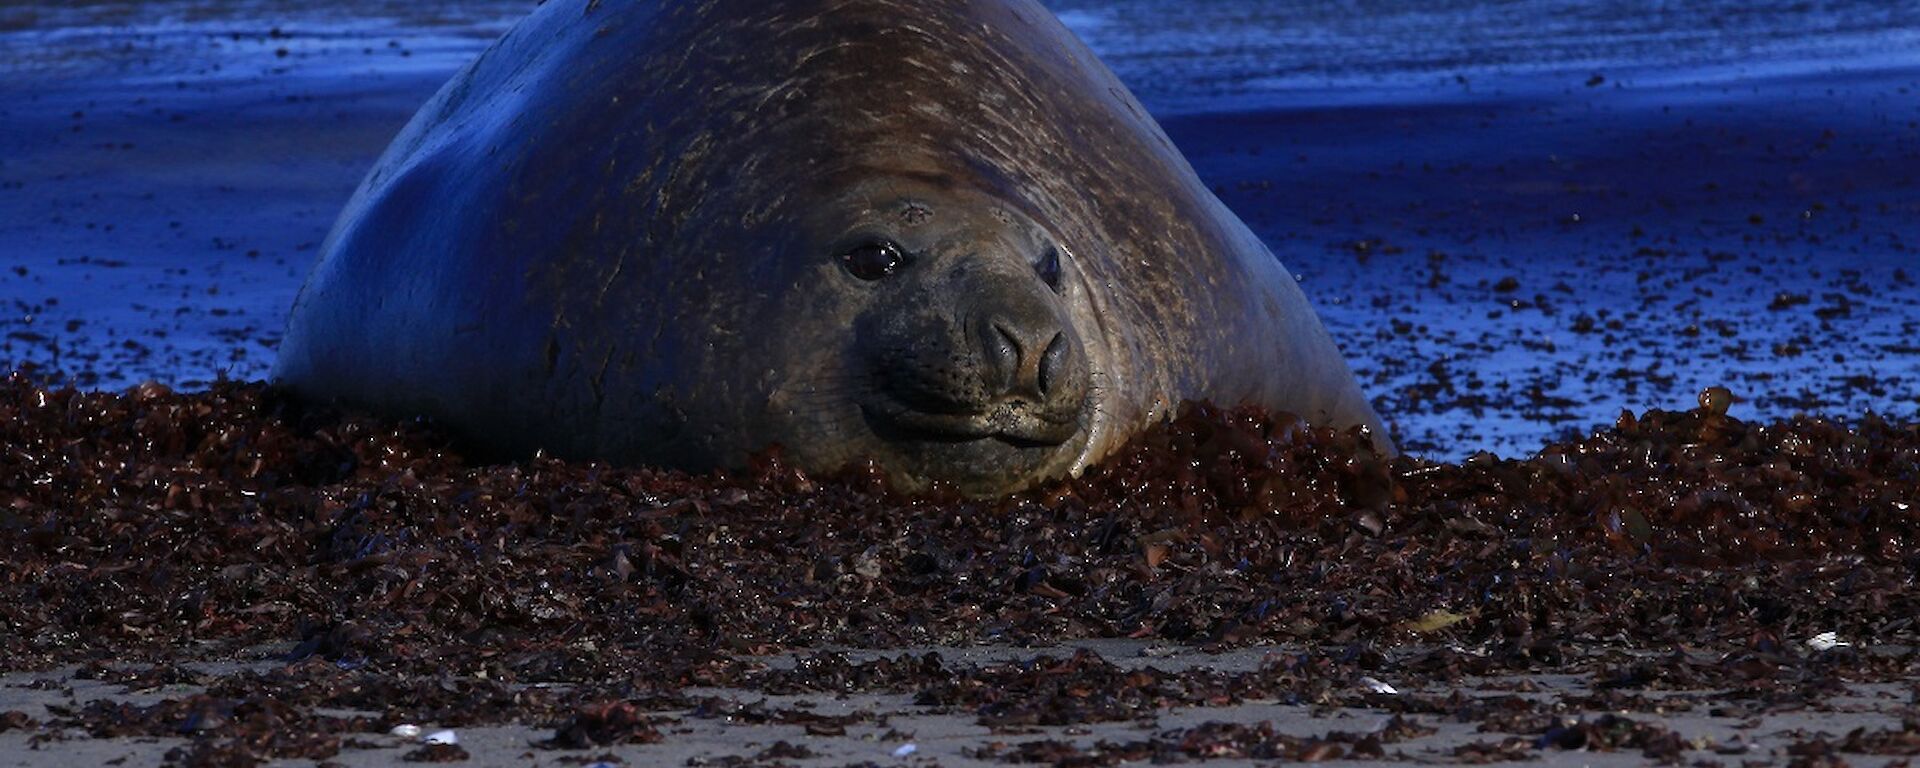 A male southern elephant seal lies on the beach having just emerged from the water. He is here to moult.